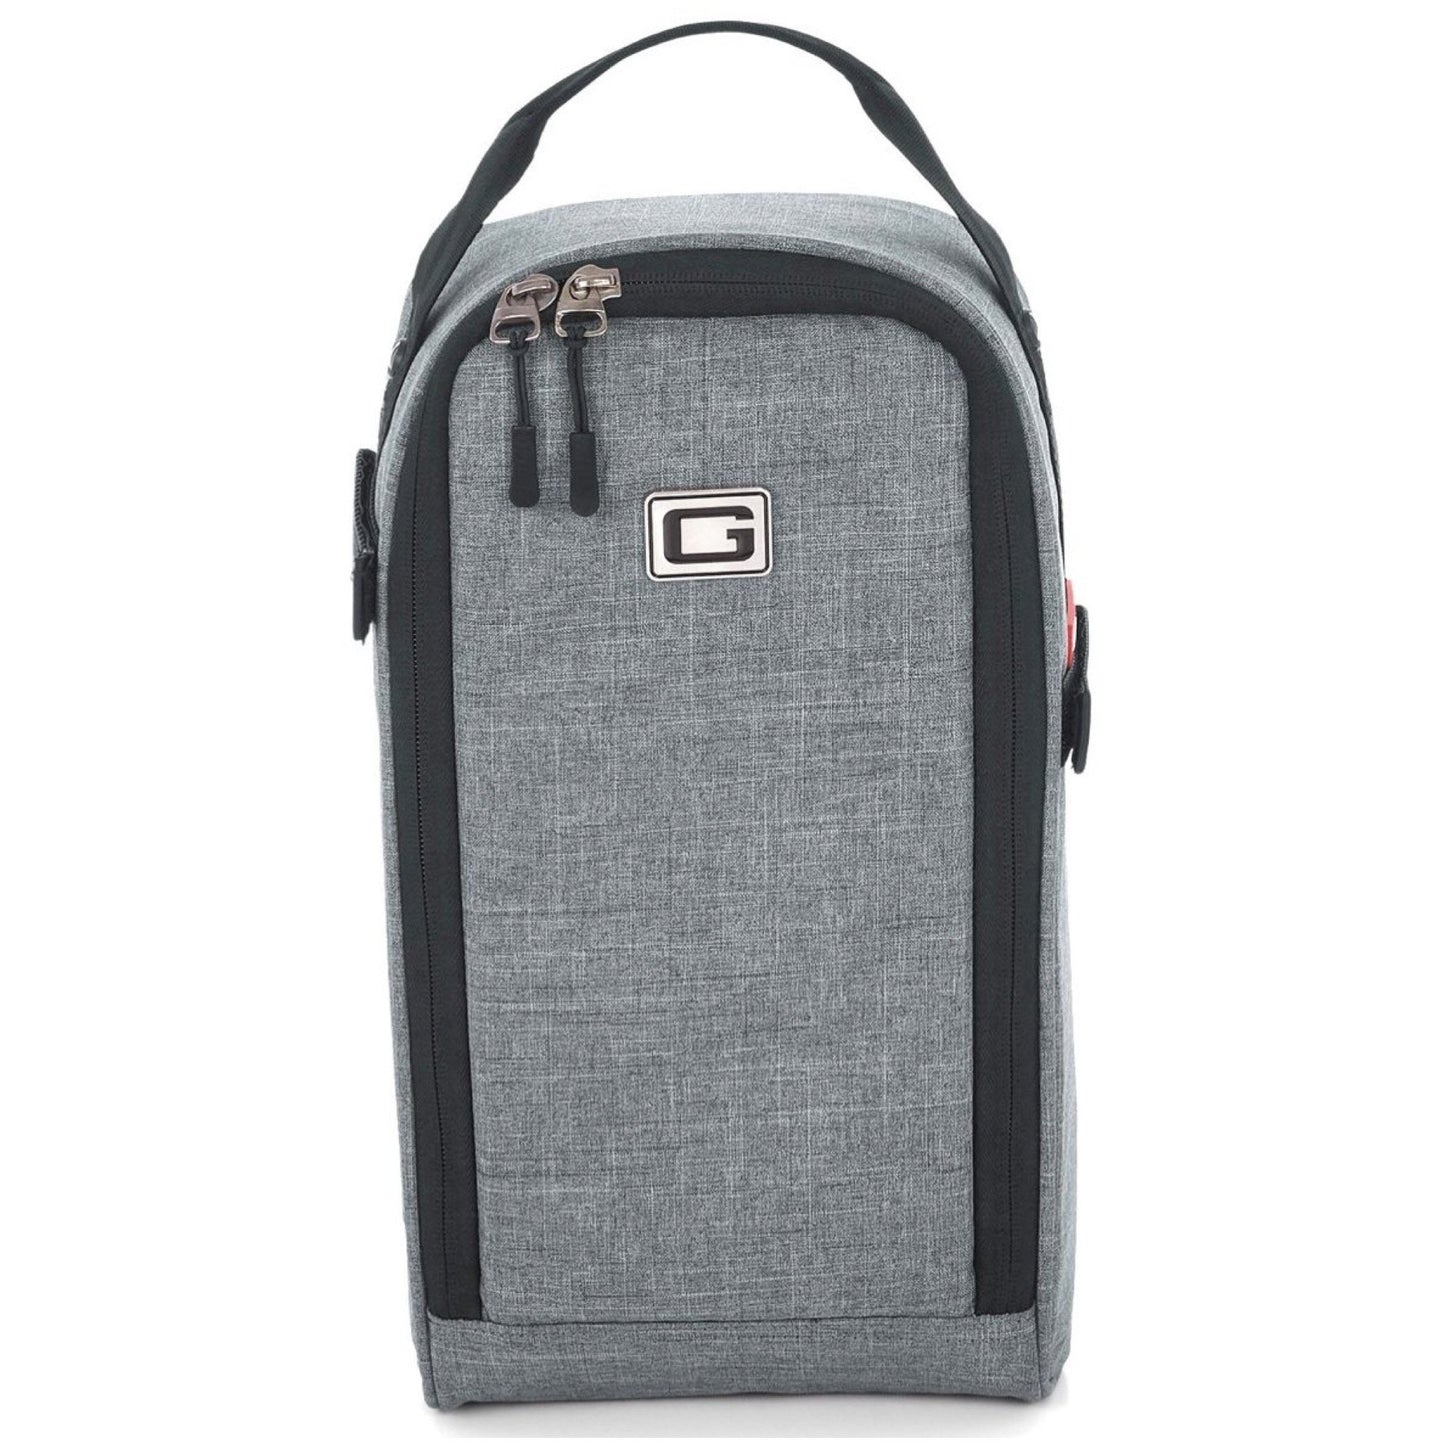 Gator GT-1407 Add-On Accessory Bag For Transit Series